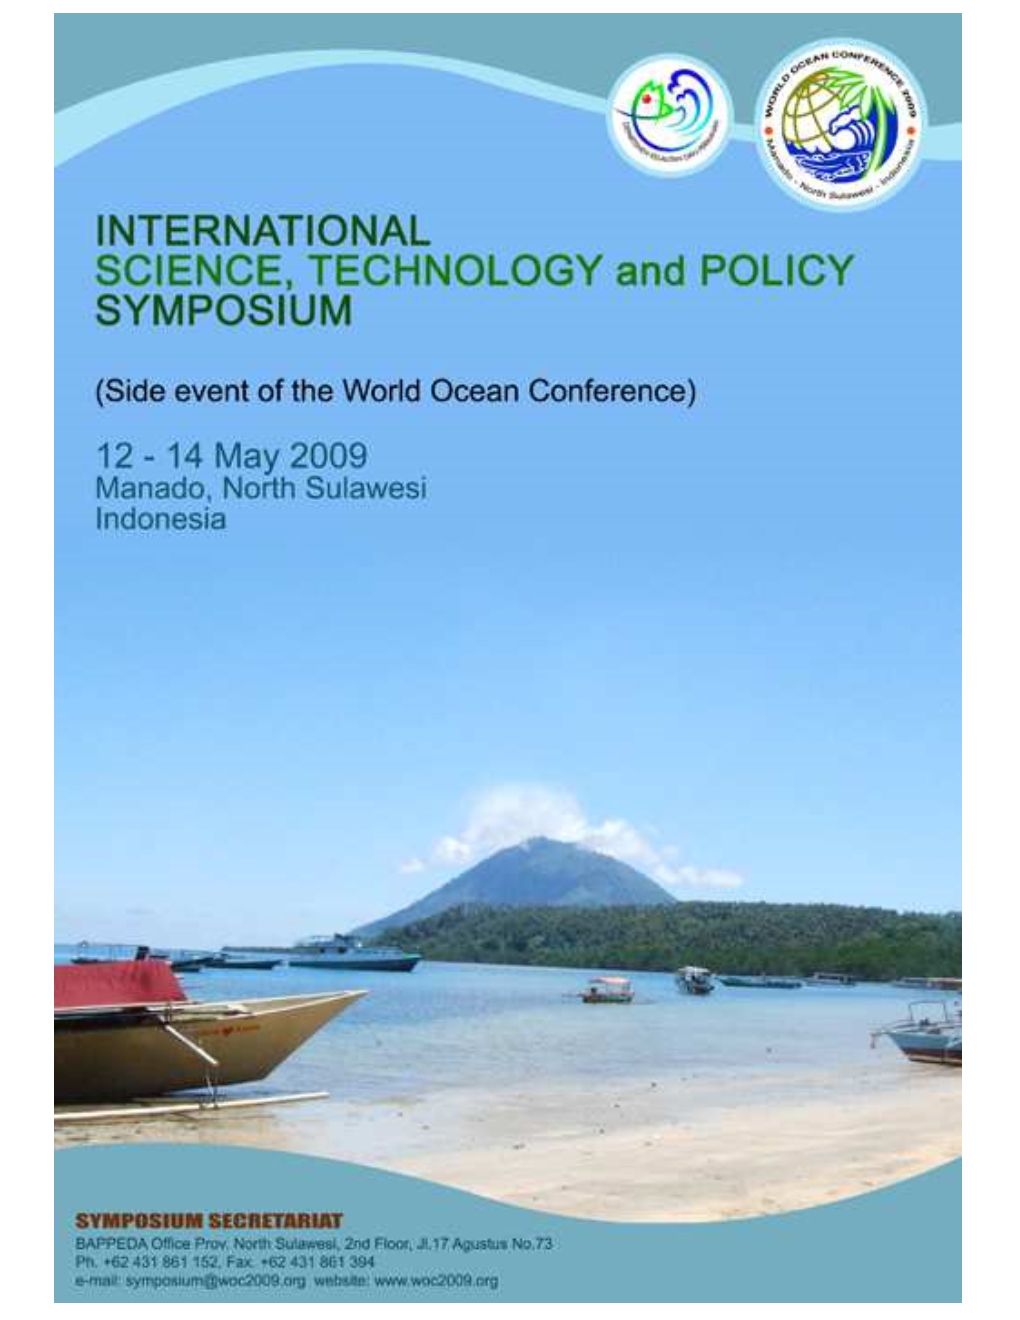 Message from the Ministry of Marine Affairs and Fisheries for the International Ocean Science, Technology and Policy Symposium 2009"